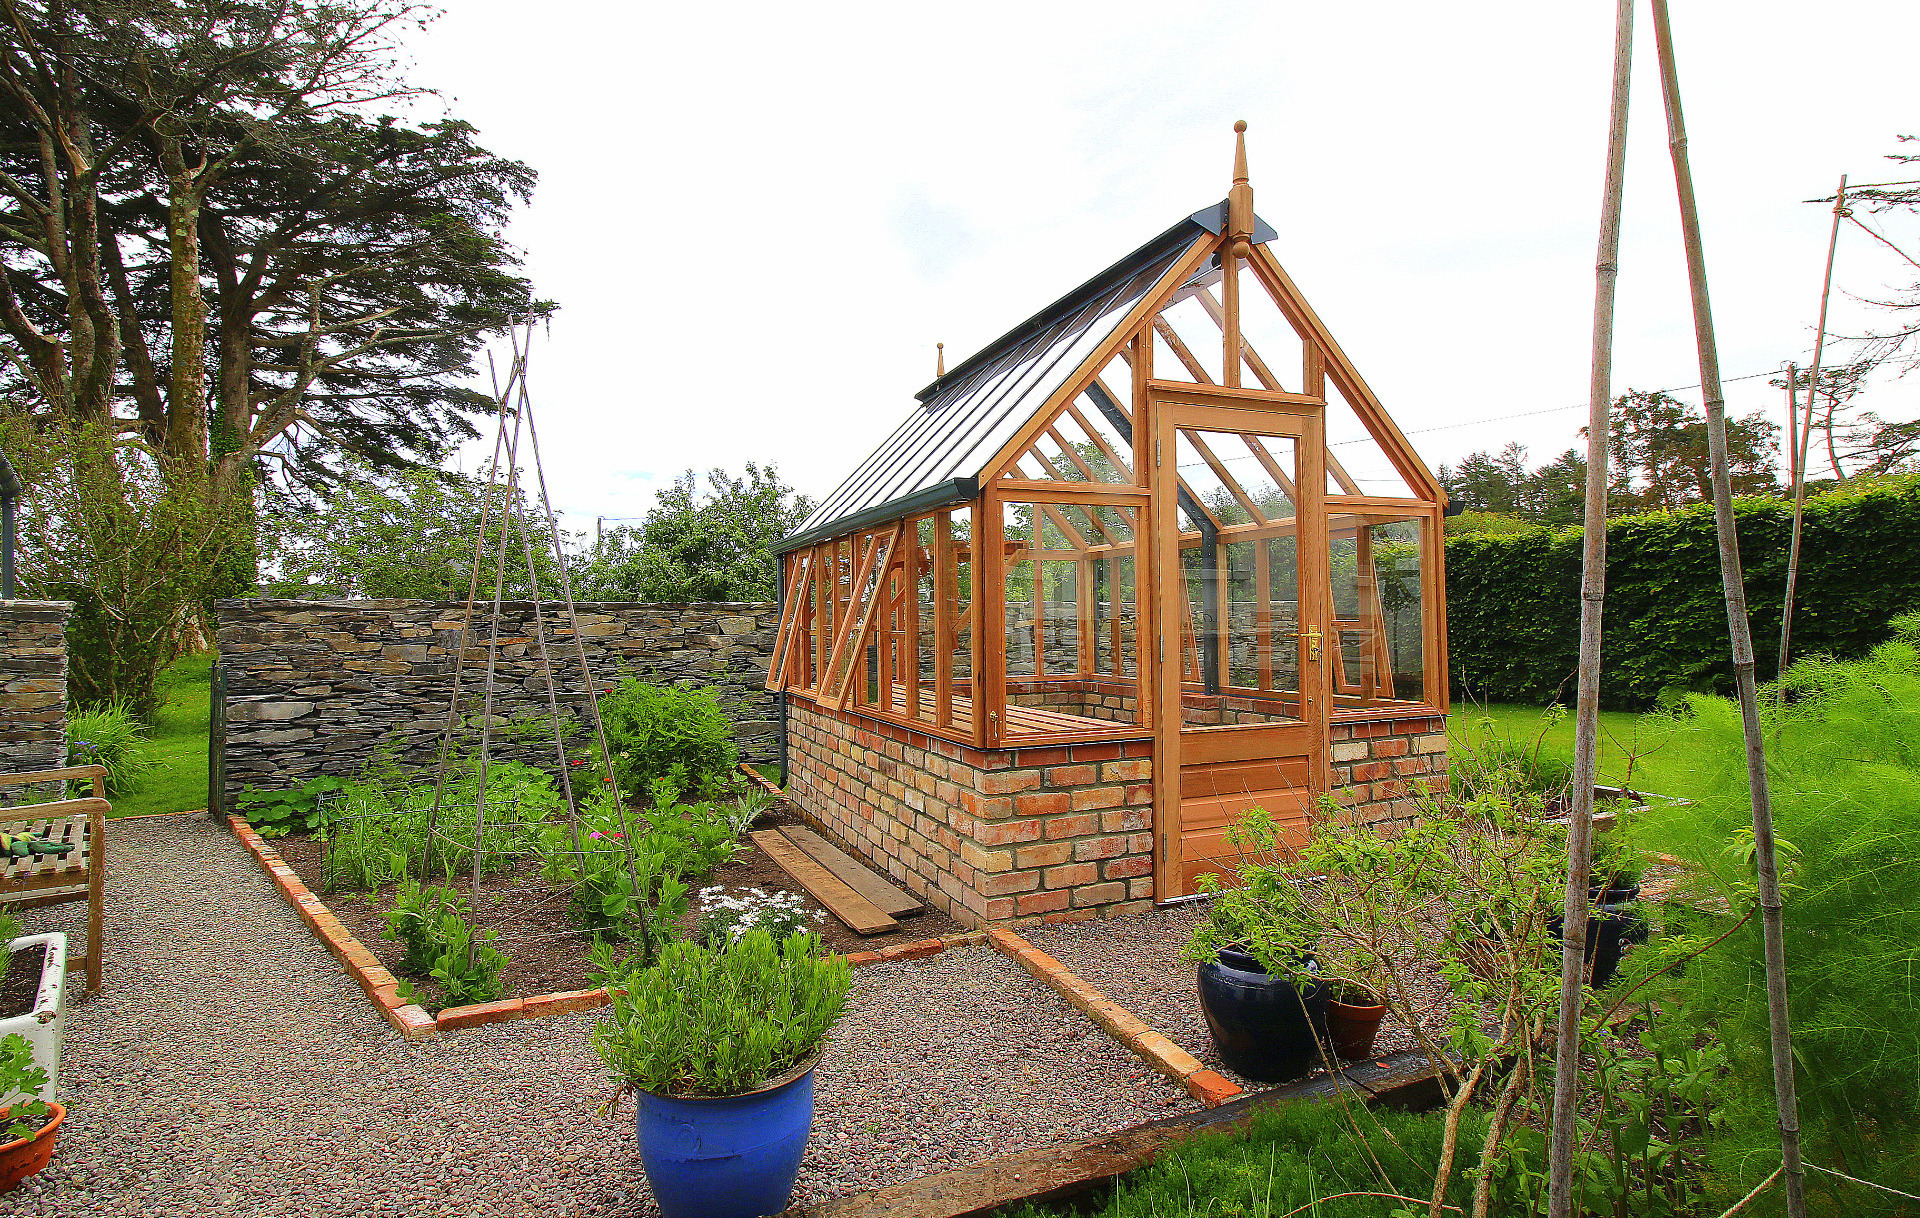 Best value in Victorian Timber Greenhouses & Planthouses at GardenStudio Tel 087-2306 128lin Ireland